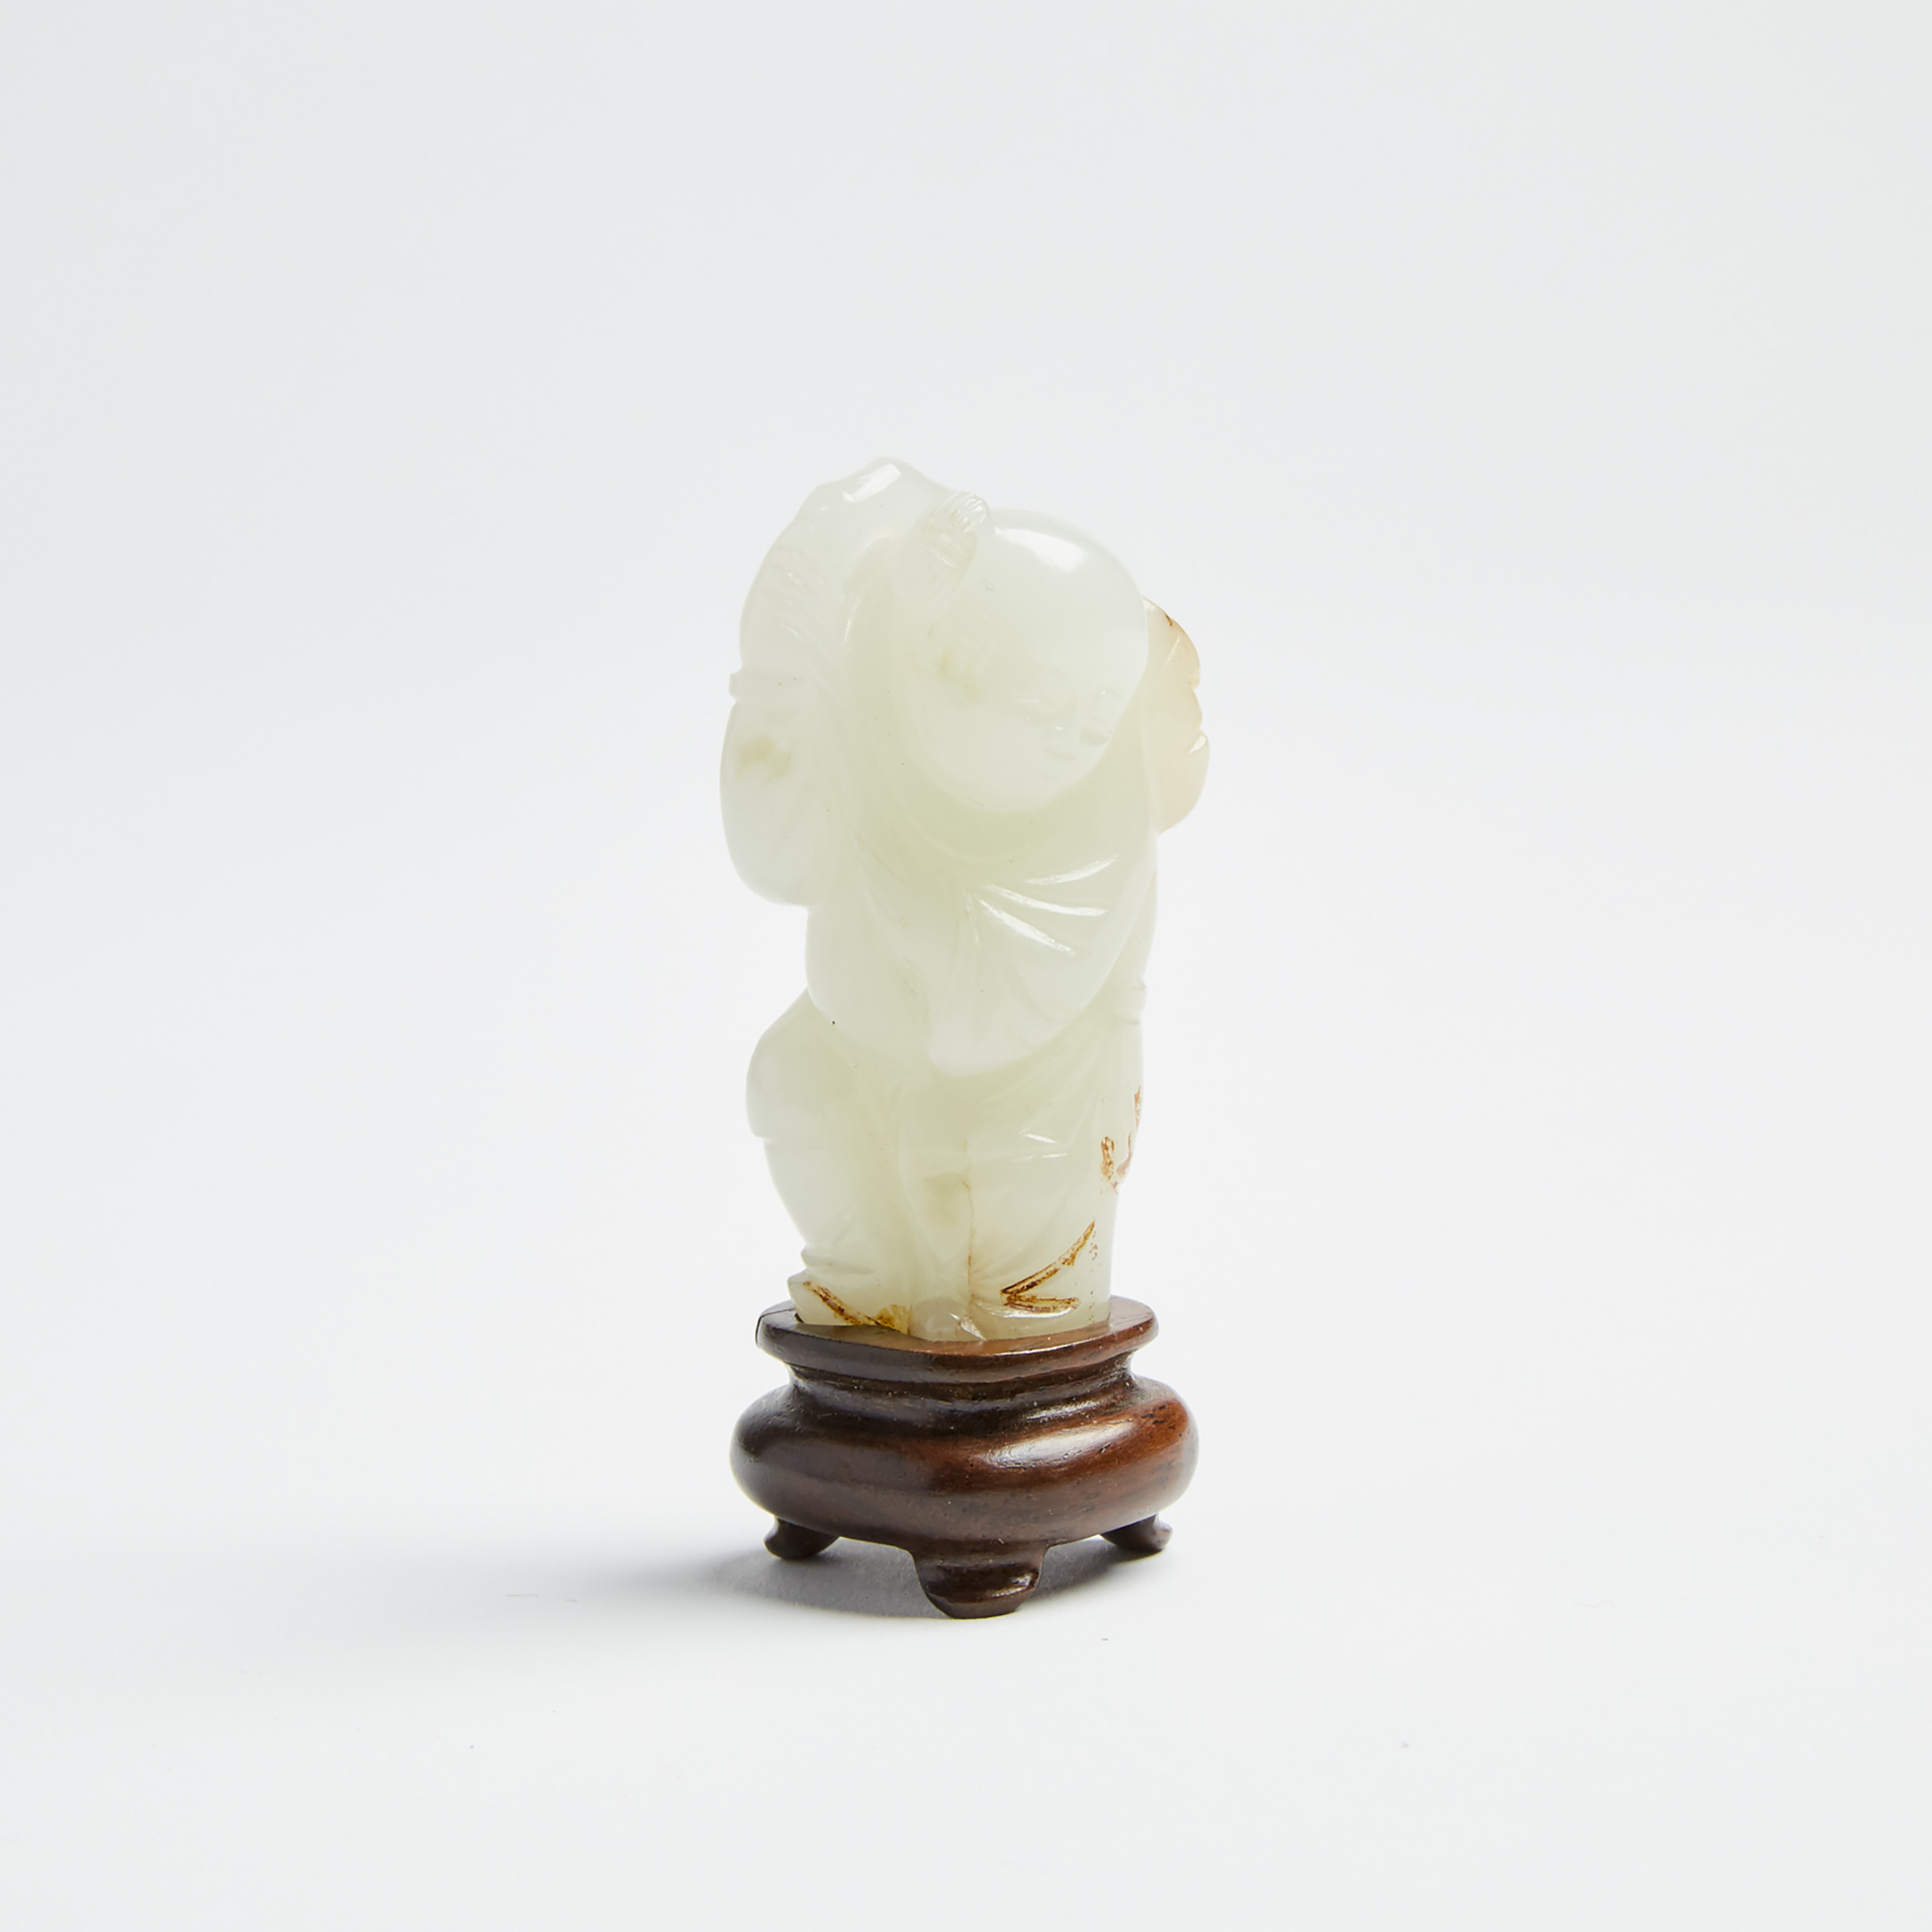 A White Jade Boy Holding Lingzhi Carving, Late Qing Dynasty